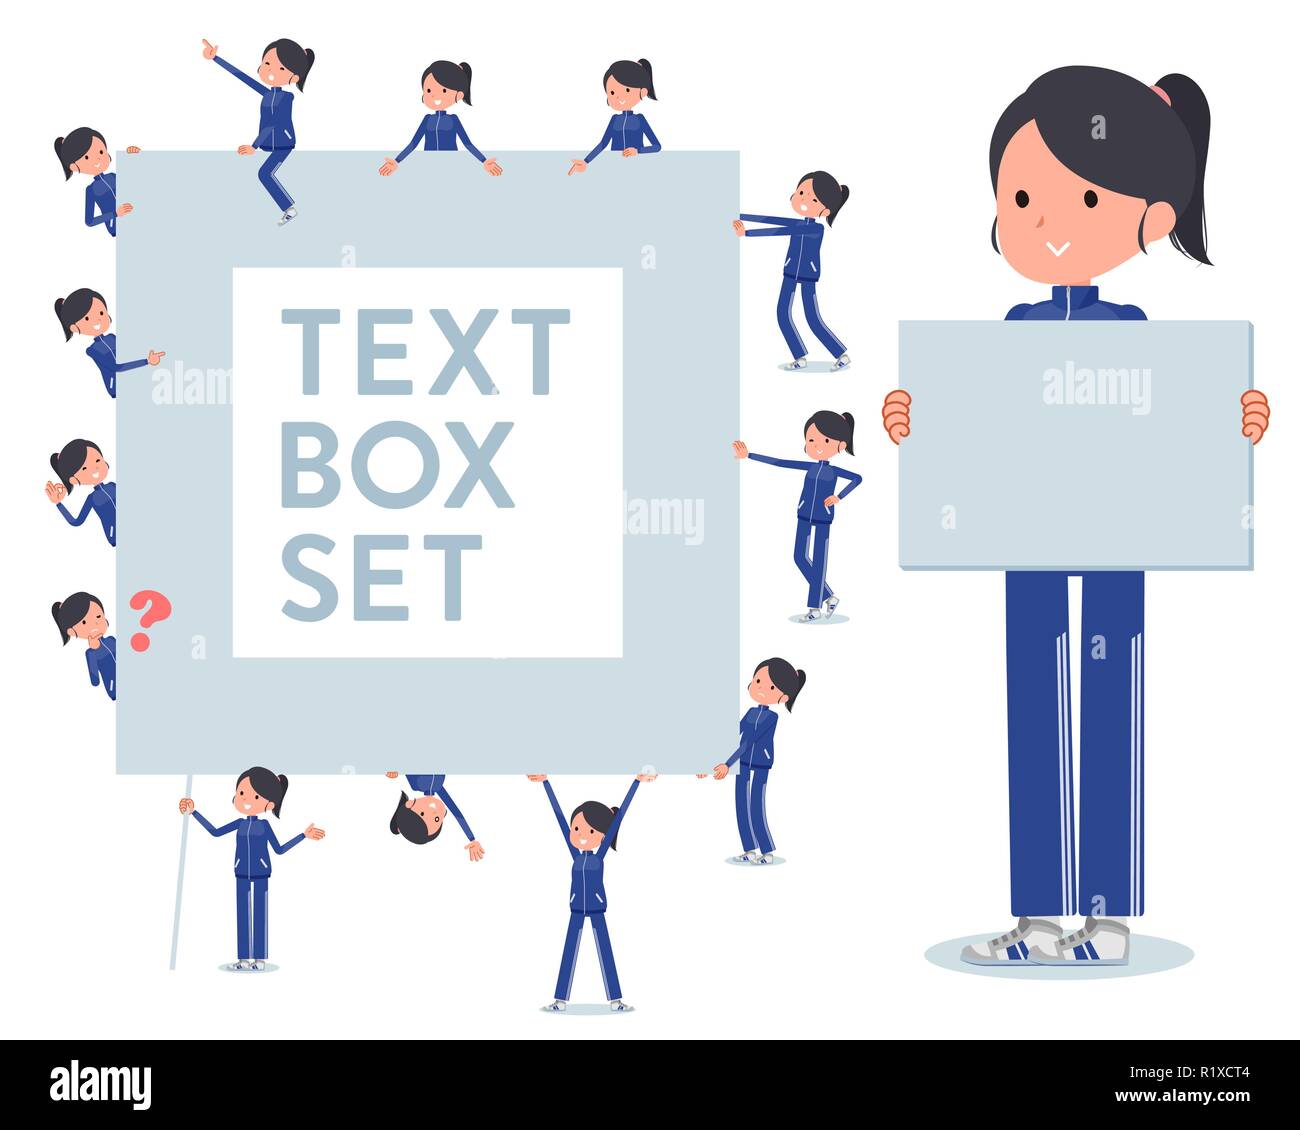 A set of women in sportswear with a message board.Since each is divided, you can move it freely.It's vector art so it's easy to edit. Stock Vector